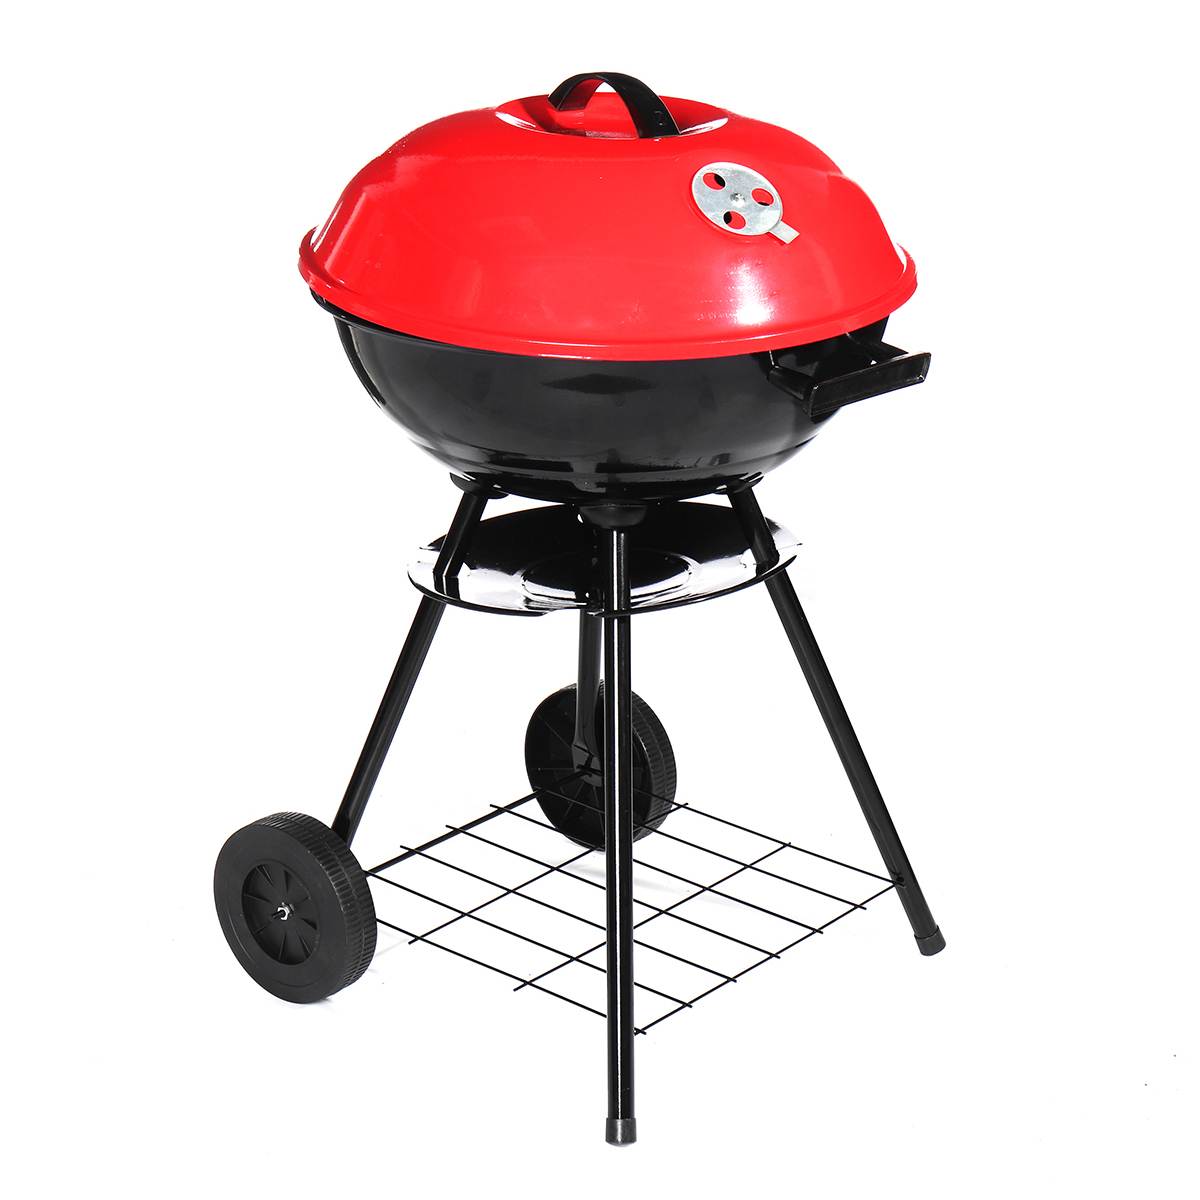 17 inch Metal Charcoal BBQ Grill With 2 Wheels Trolley Pit Outdoor Camping Cooker Kitchen Garden Barbecue Tools BBQ Accessories